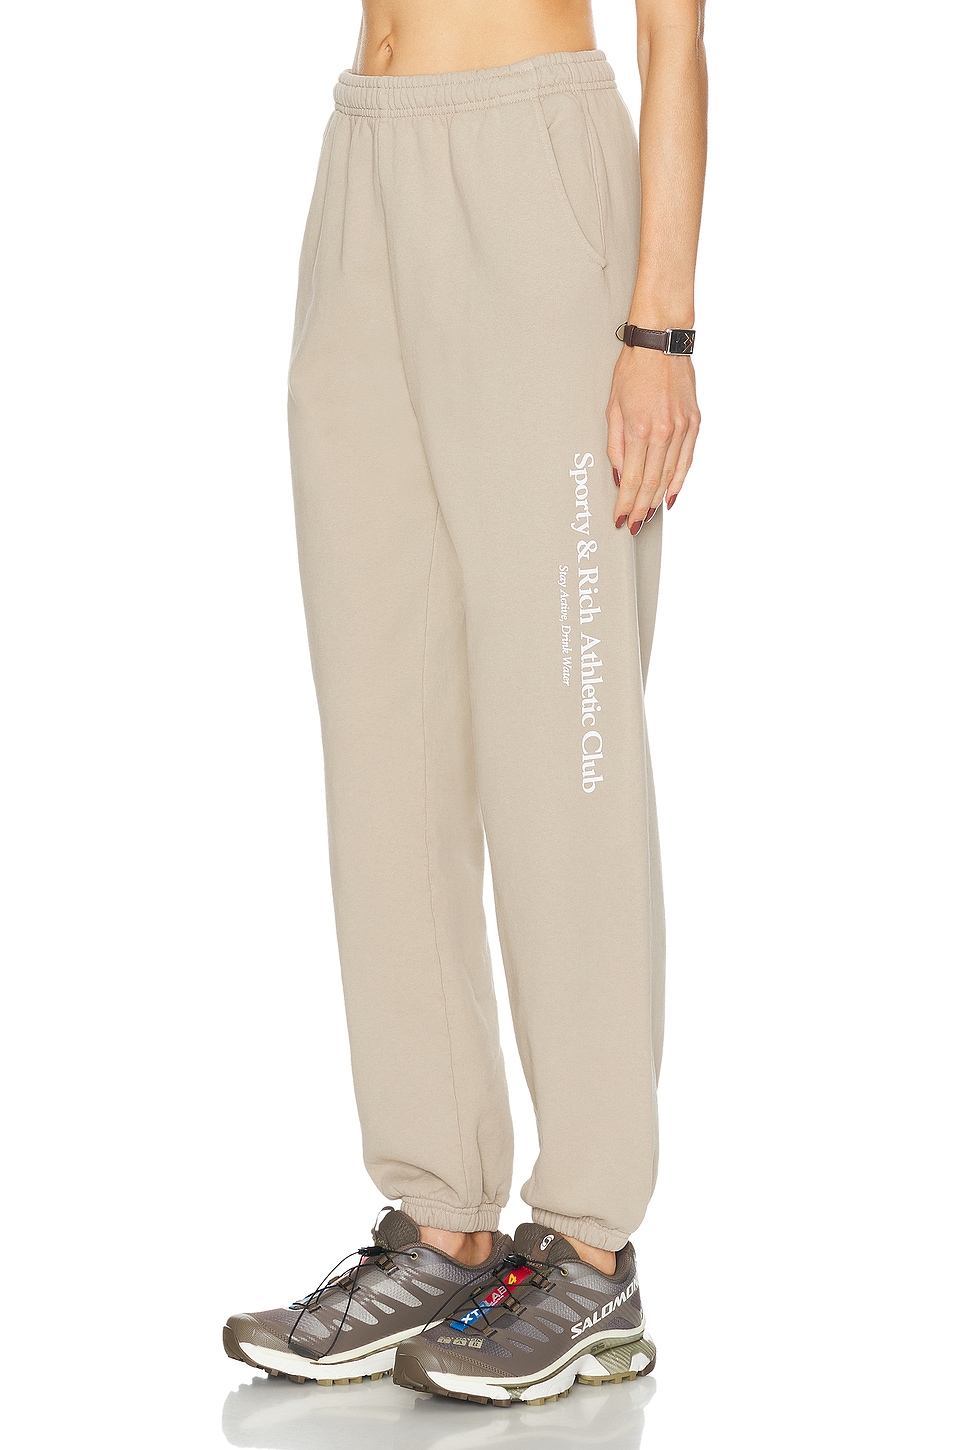 Image 1 of Sporty & Rich Athletic Club Sweatpant in Elephant & White